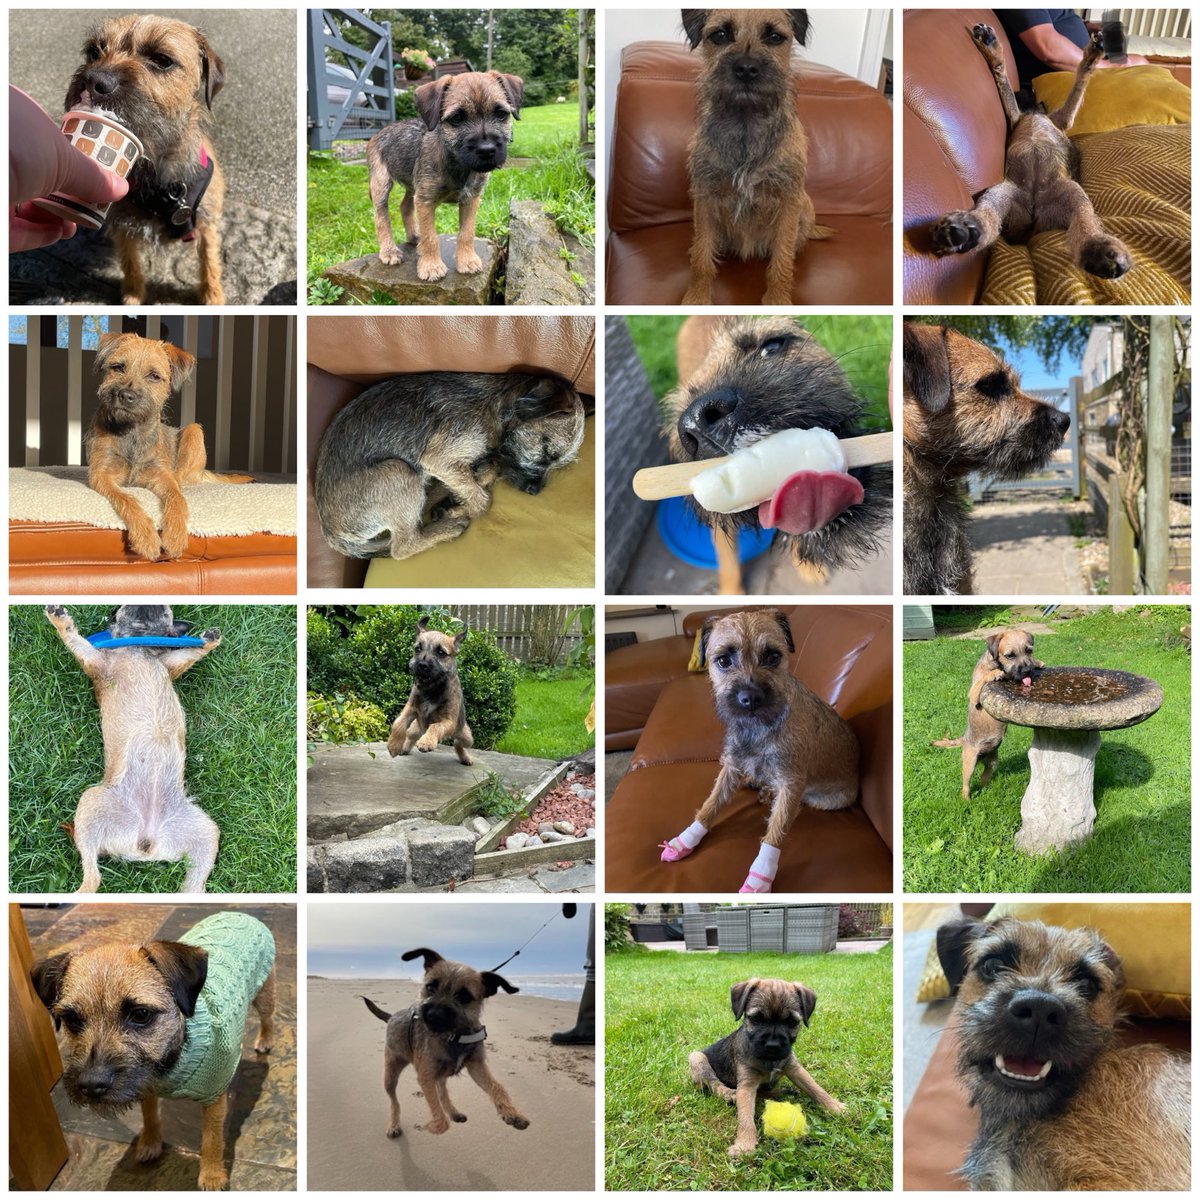 It’s my birthday - I am 2 today! 🎂🎉
Here are some of my favourite photos ❤️🐶🐾

I’m hoping for a nice walk this morning and a surprise birthday tea *looks over shoulder to check hoos are paying attention* 

Hope all my pals have a lovely day 🥰
#BTPosse #PeggyIs2